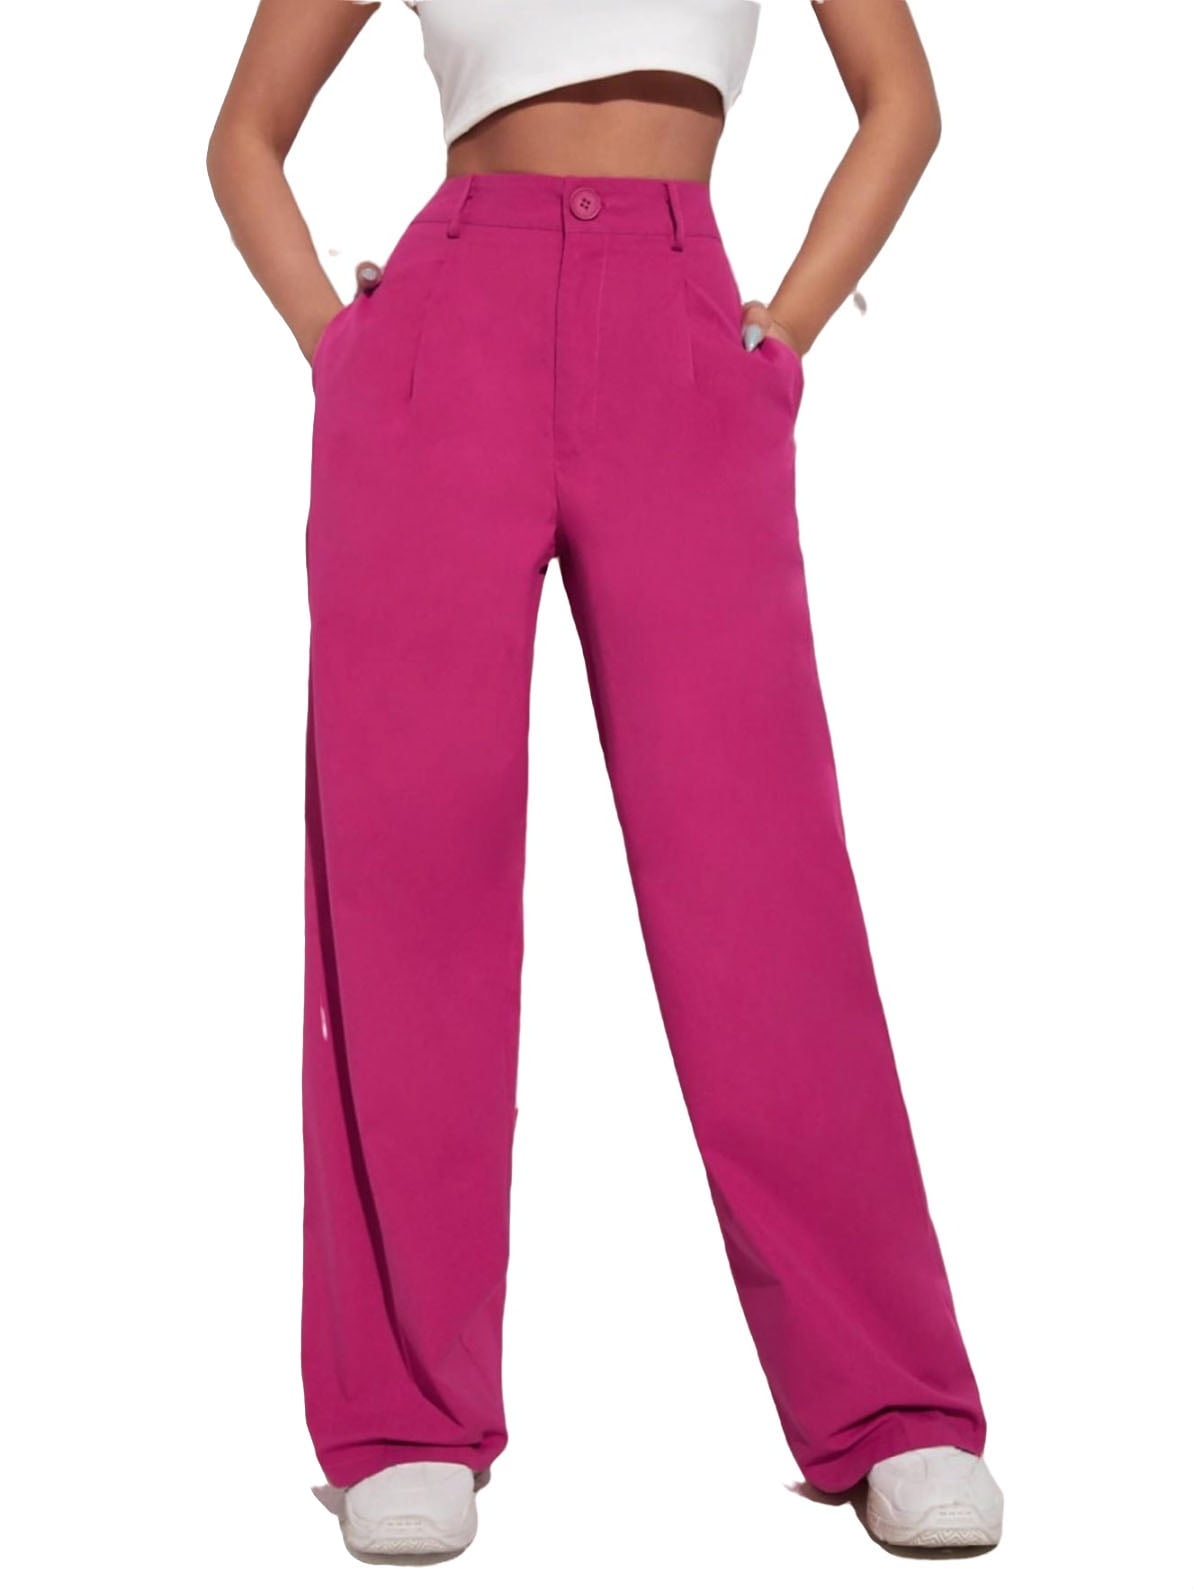 Hot Pink Flare Pants for Women